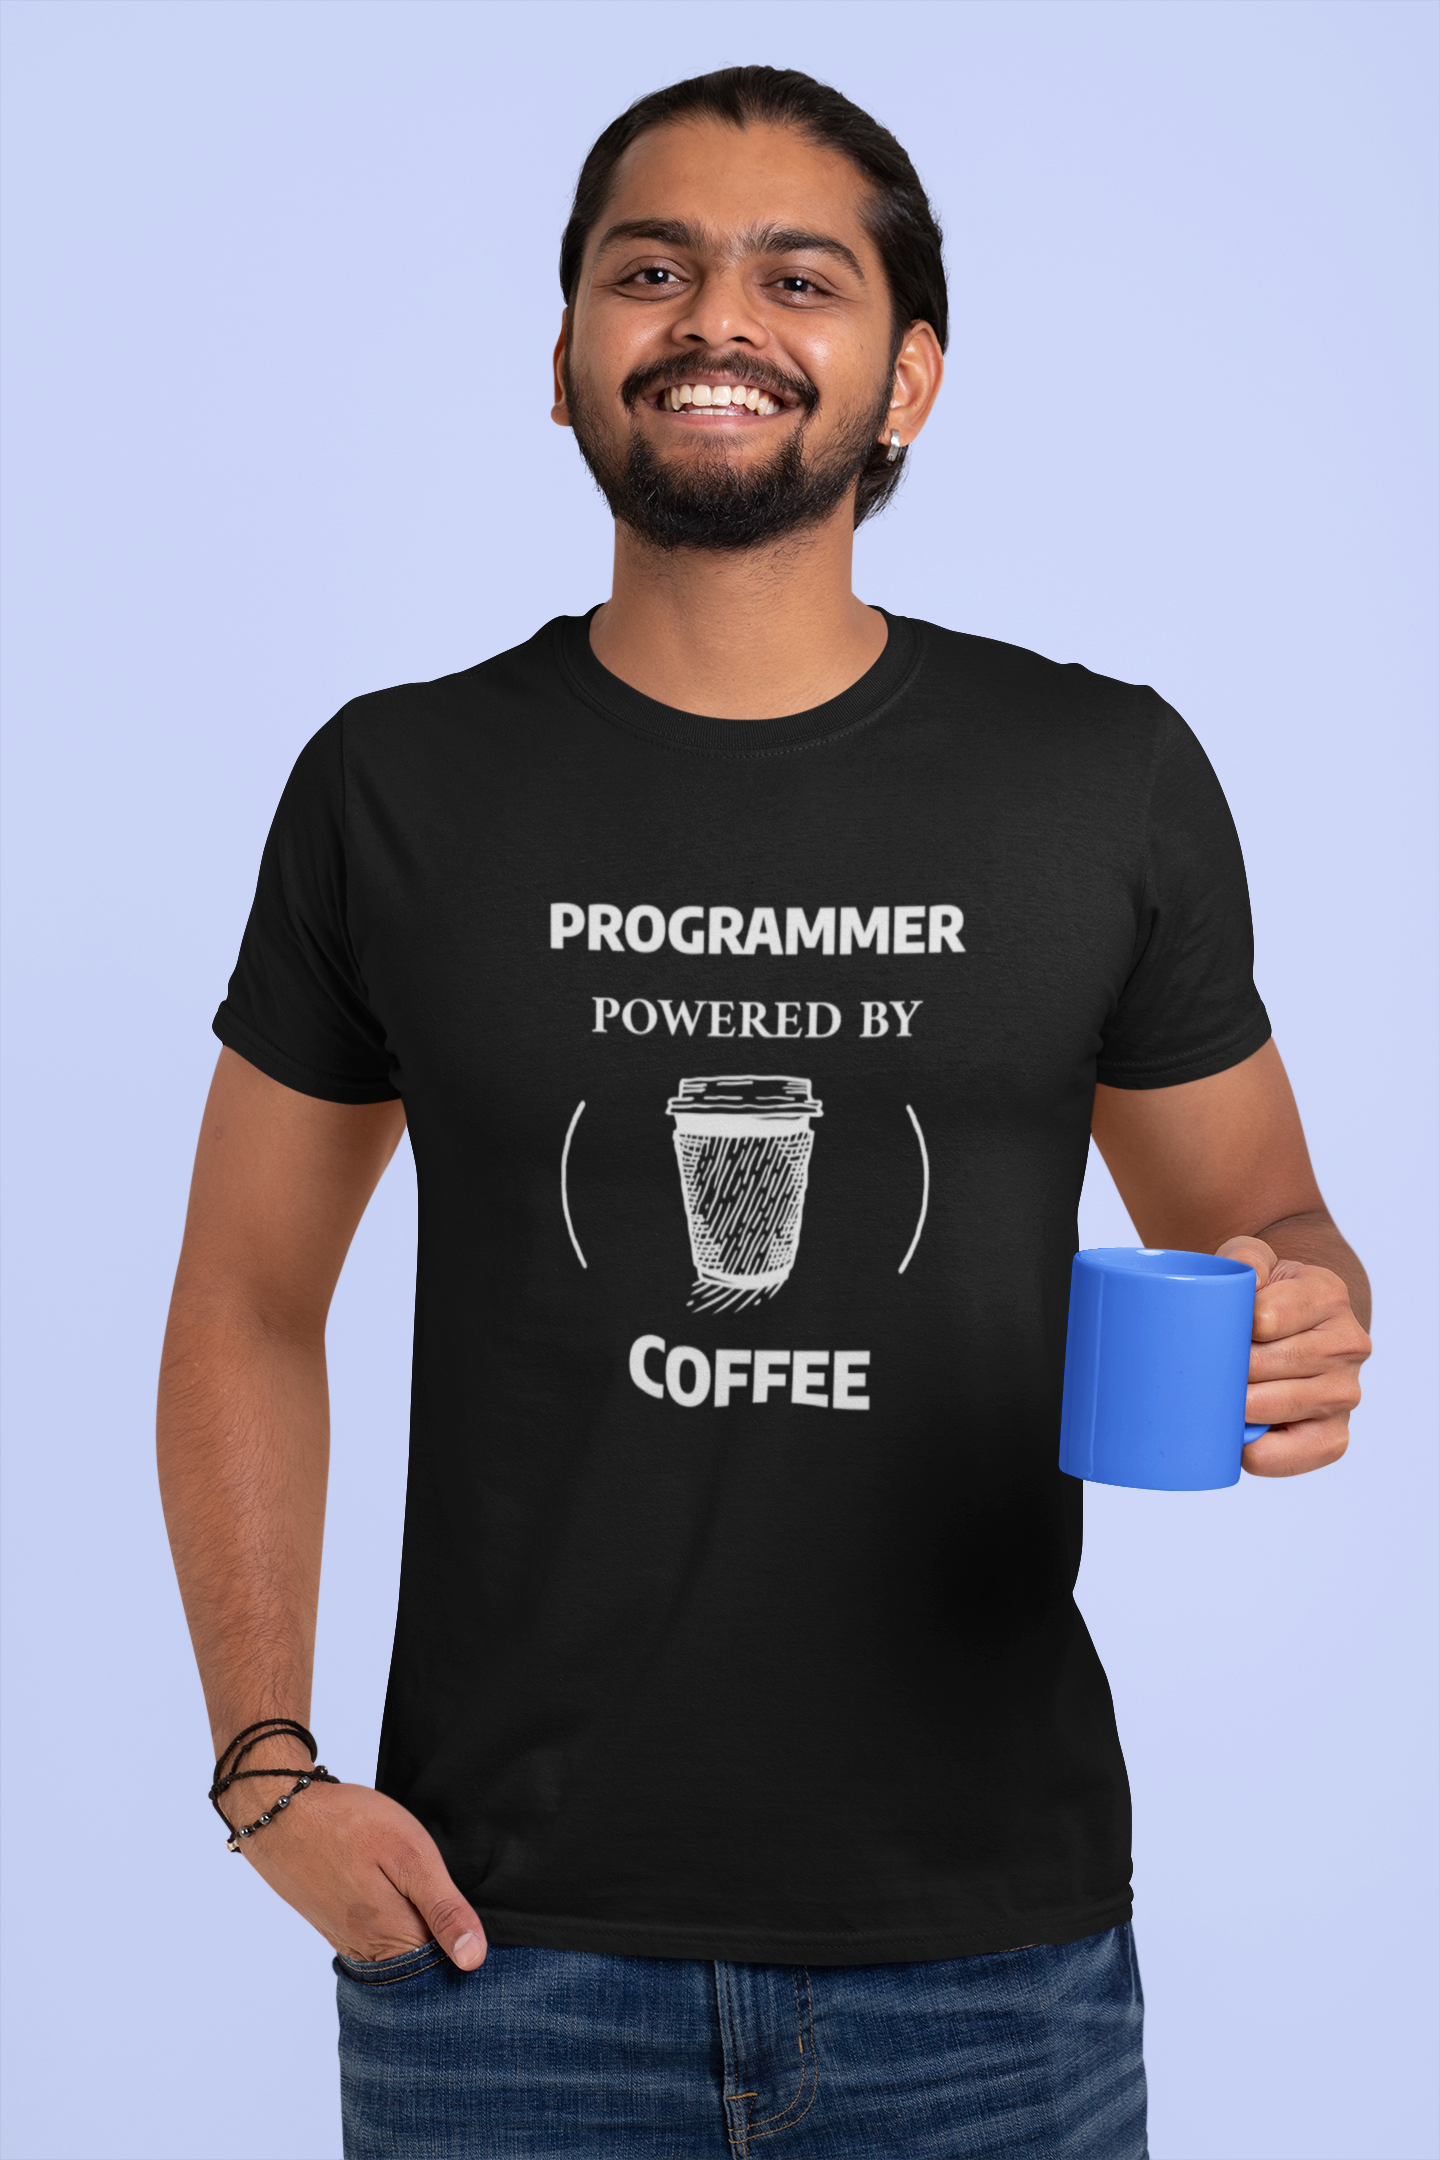 Programmer Powered By Coffee  Men T-Shirt for programmers - nautunkee.com